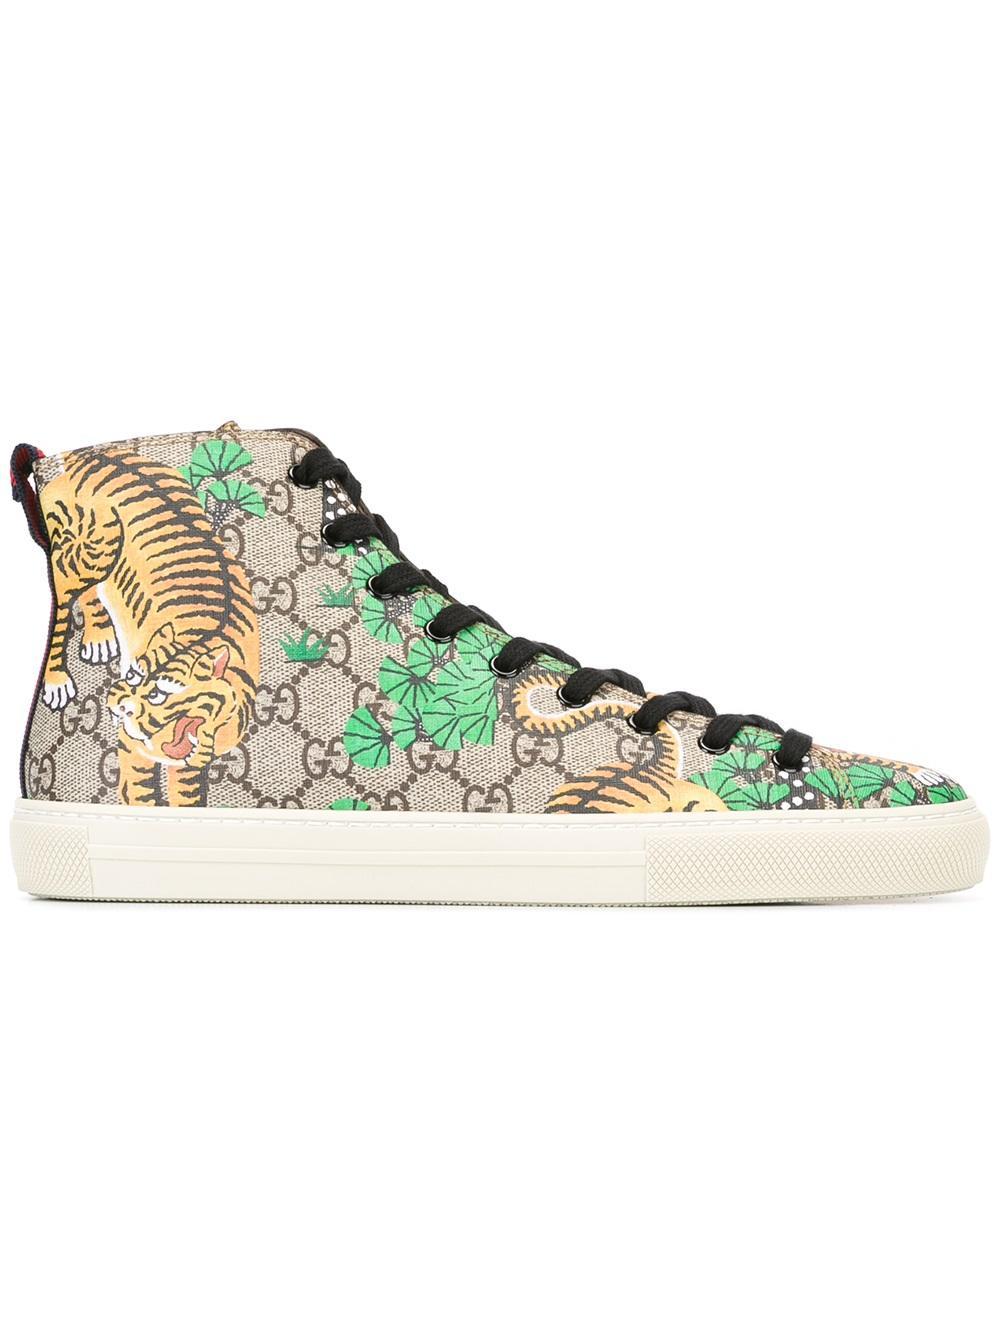 Gucci 'bengal Tiger Gg Supreme' Hi-top Sneakers in Green | Lyst